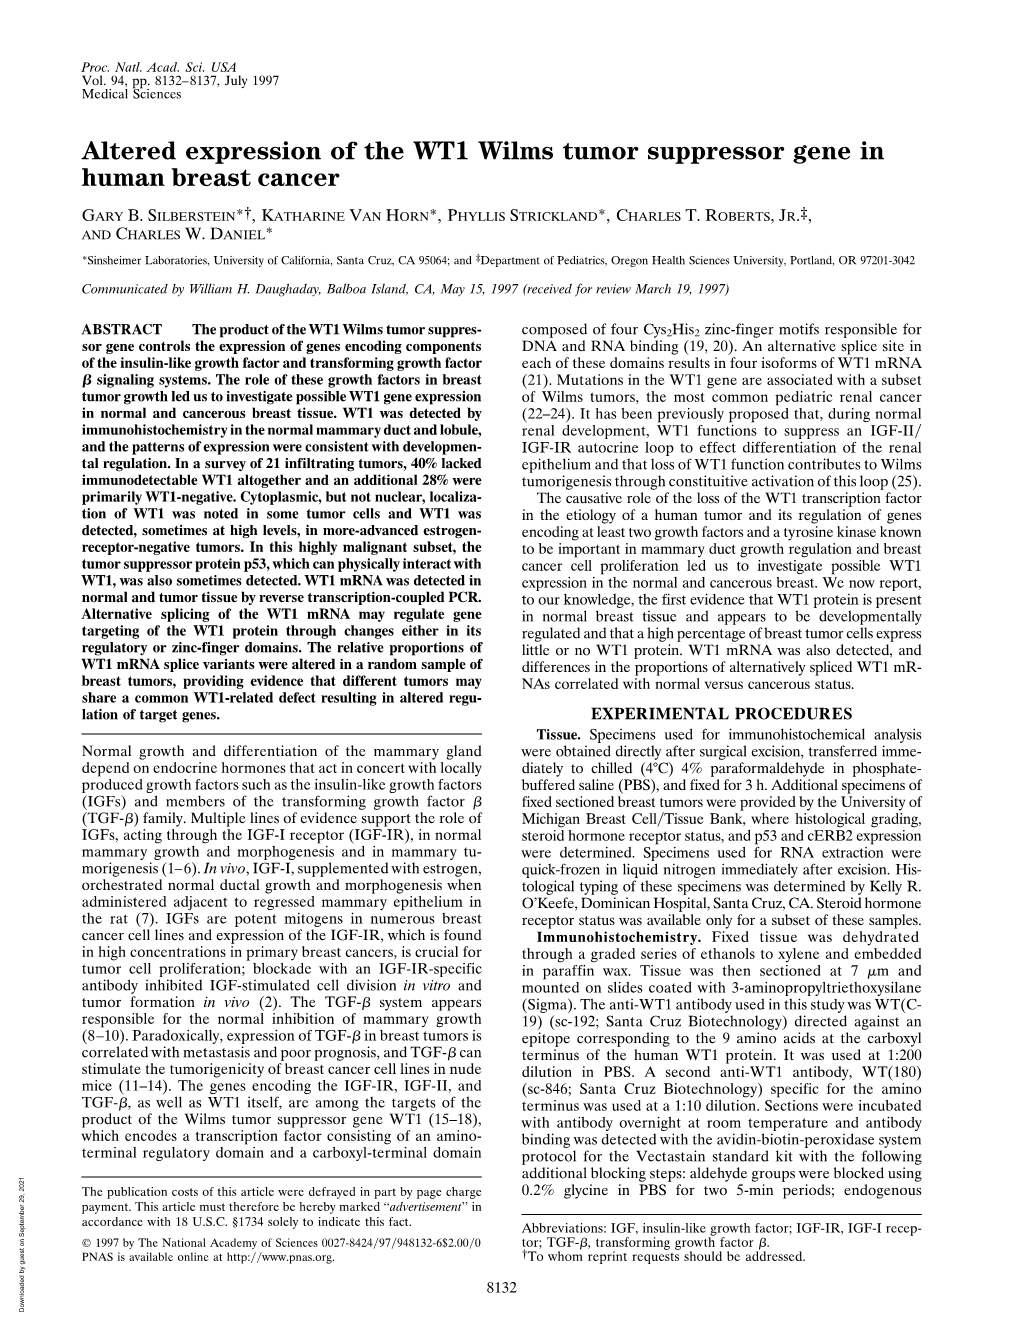 Altered Expression of the WT1 Wilms Tumor Suppressor Gene in Human Breast Cancer